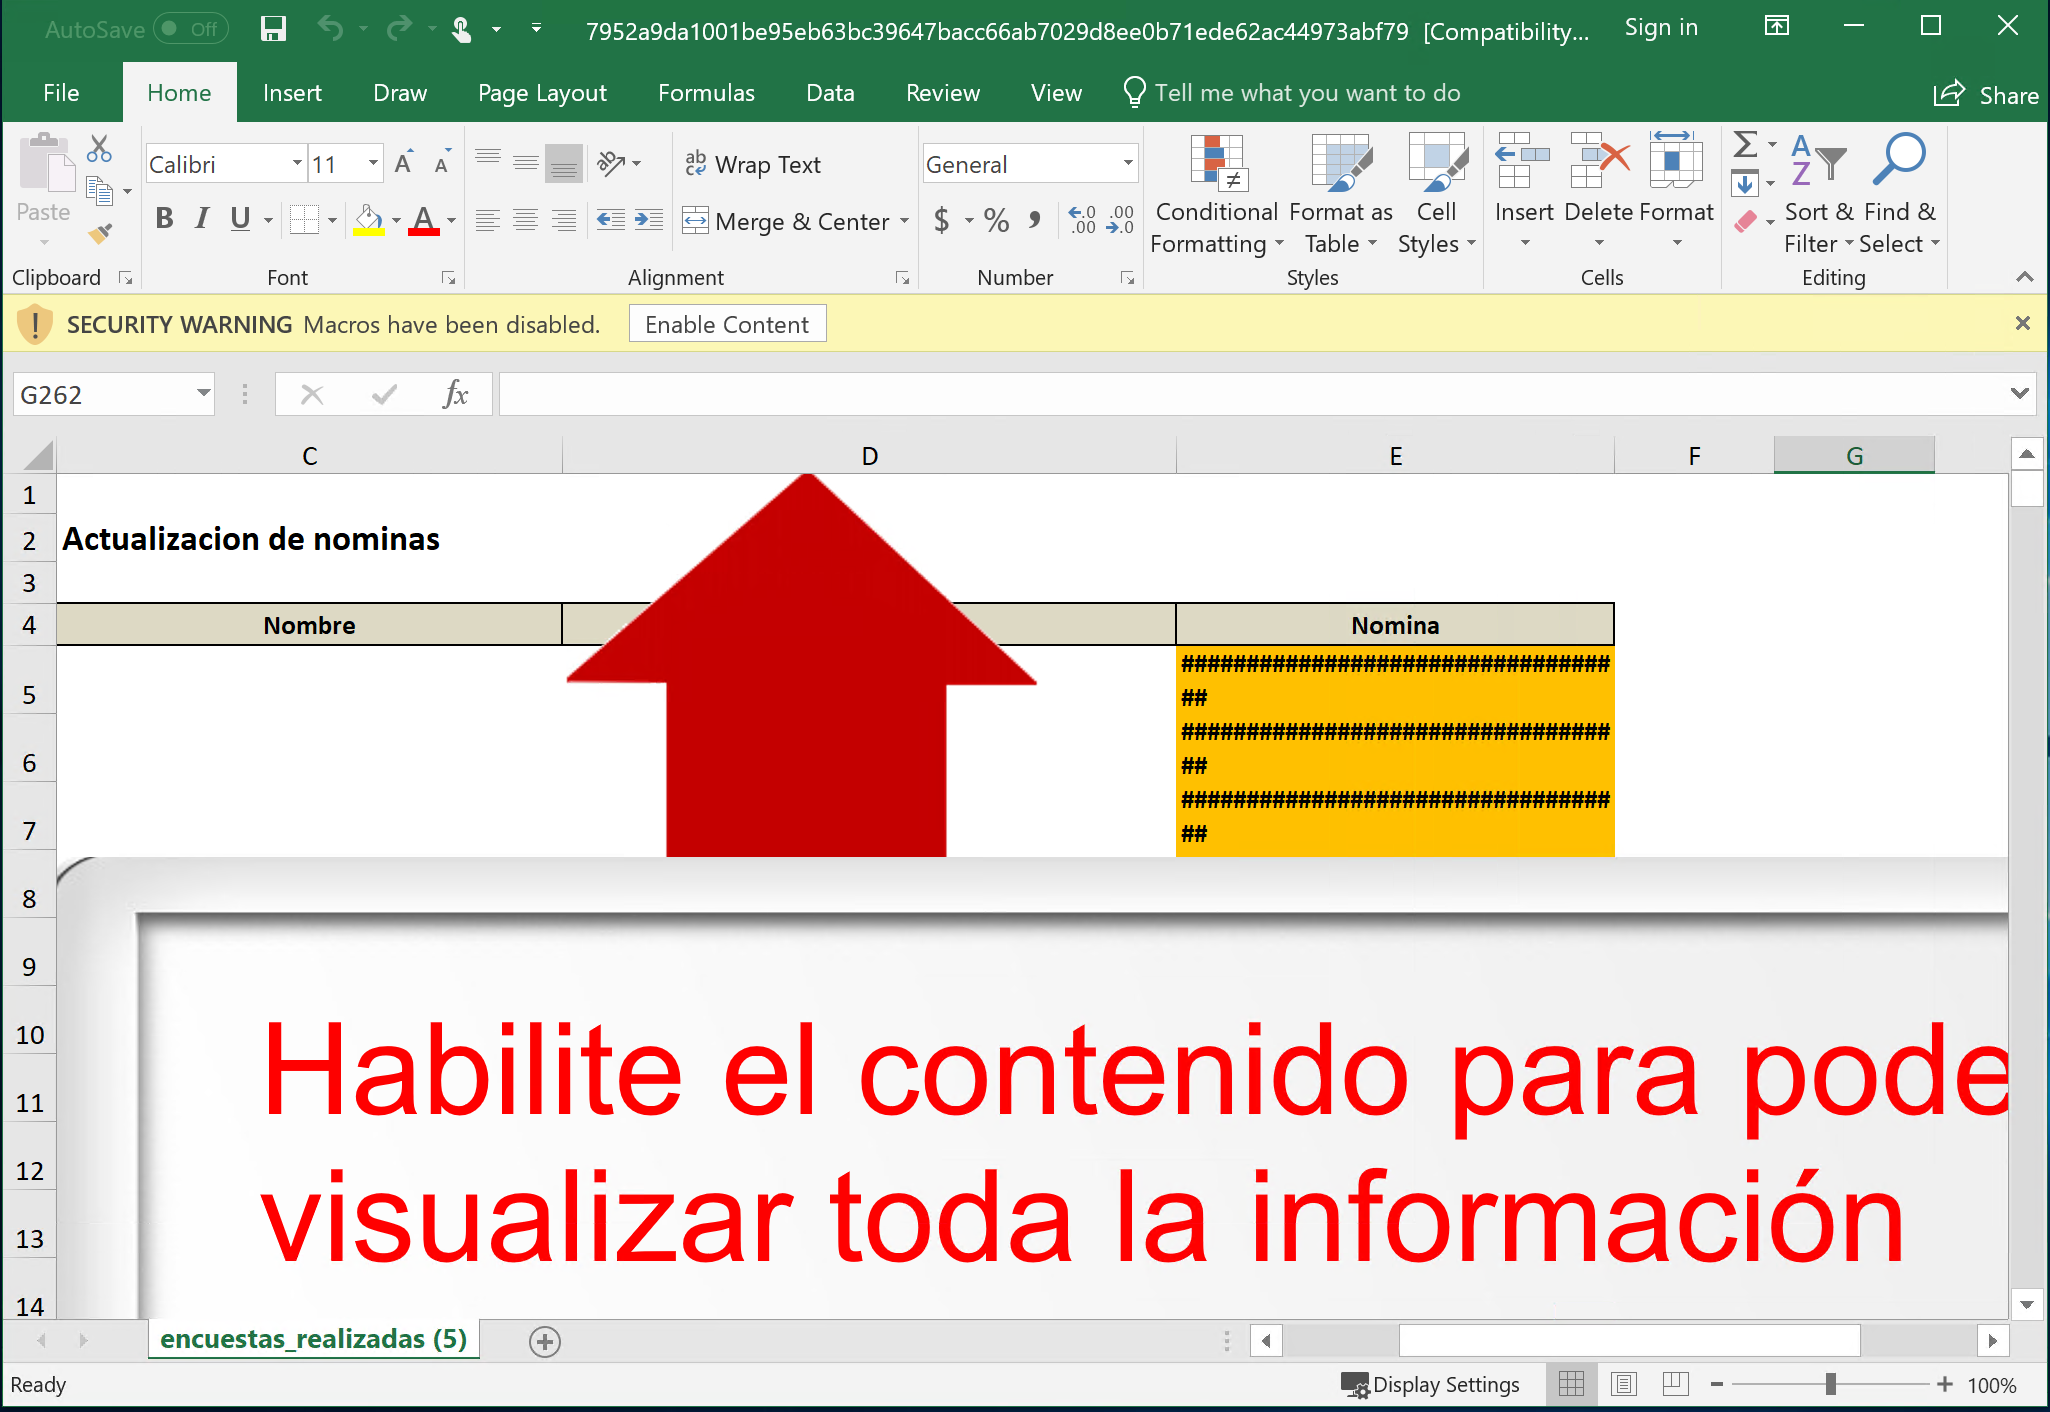 Screenshot of Microsoft Excel with "Macros disabled" Security warning and button to "Enable Content"